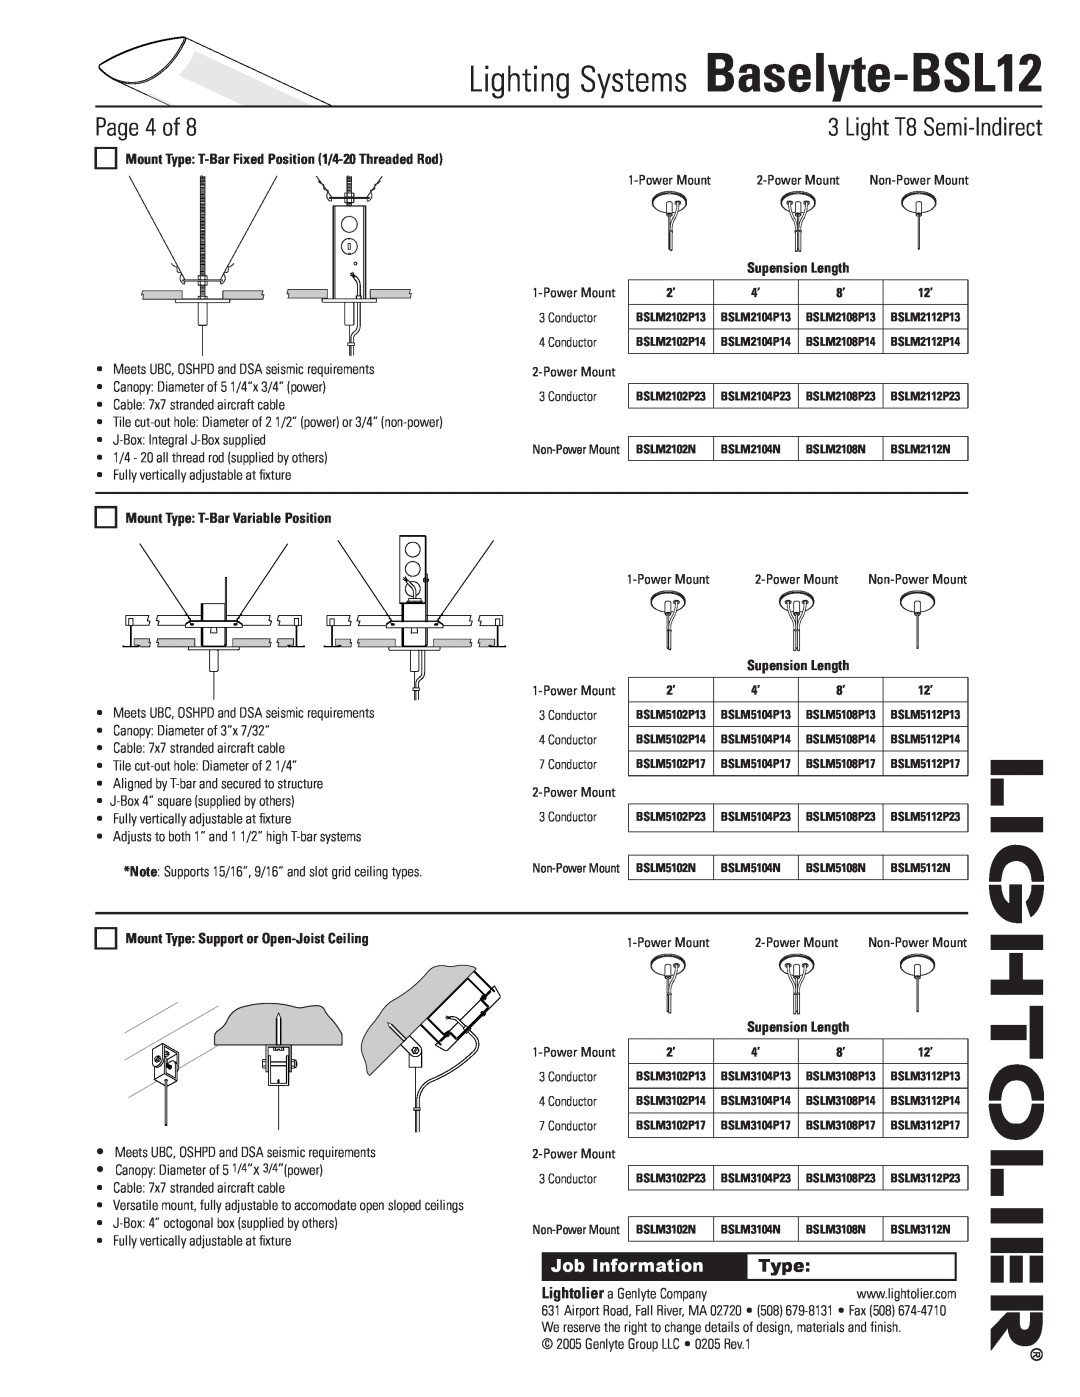 Lightolier Baselyte-BSL12 Page of, Mount Type T-BarVariable Position, Mount Type Support or Open-JoistCeiling 